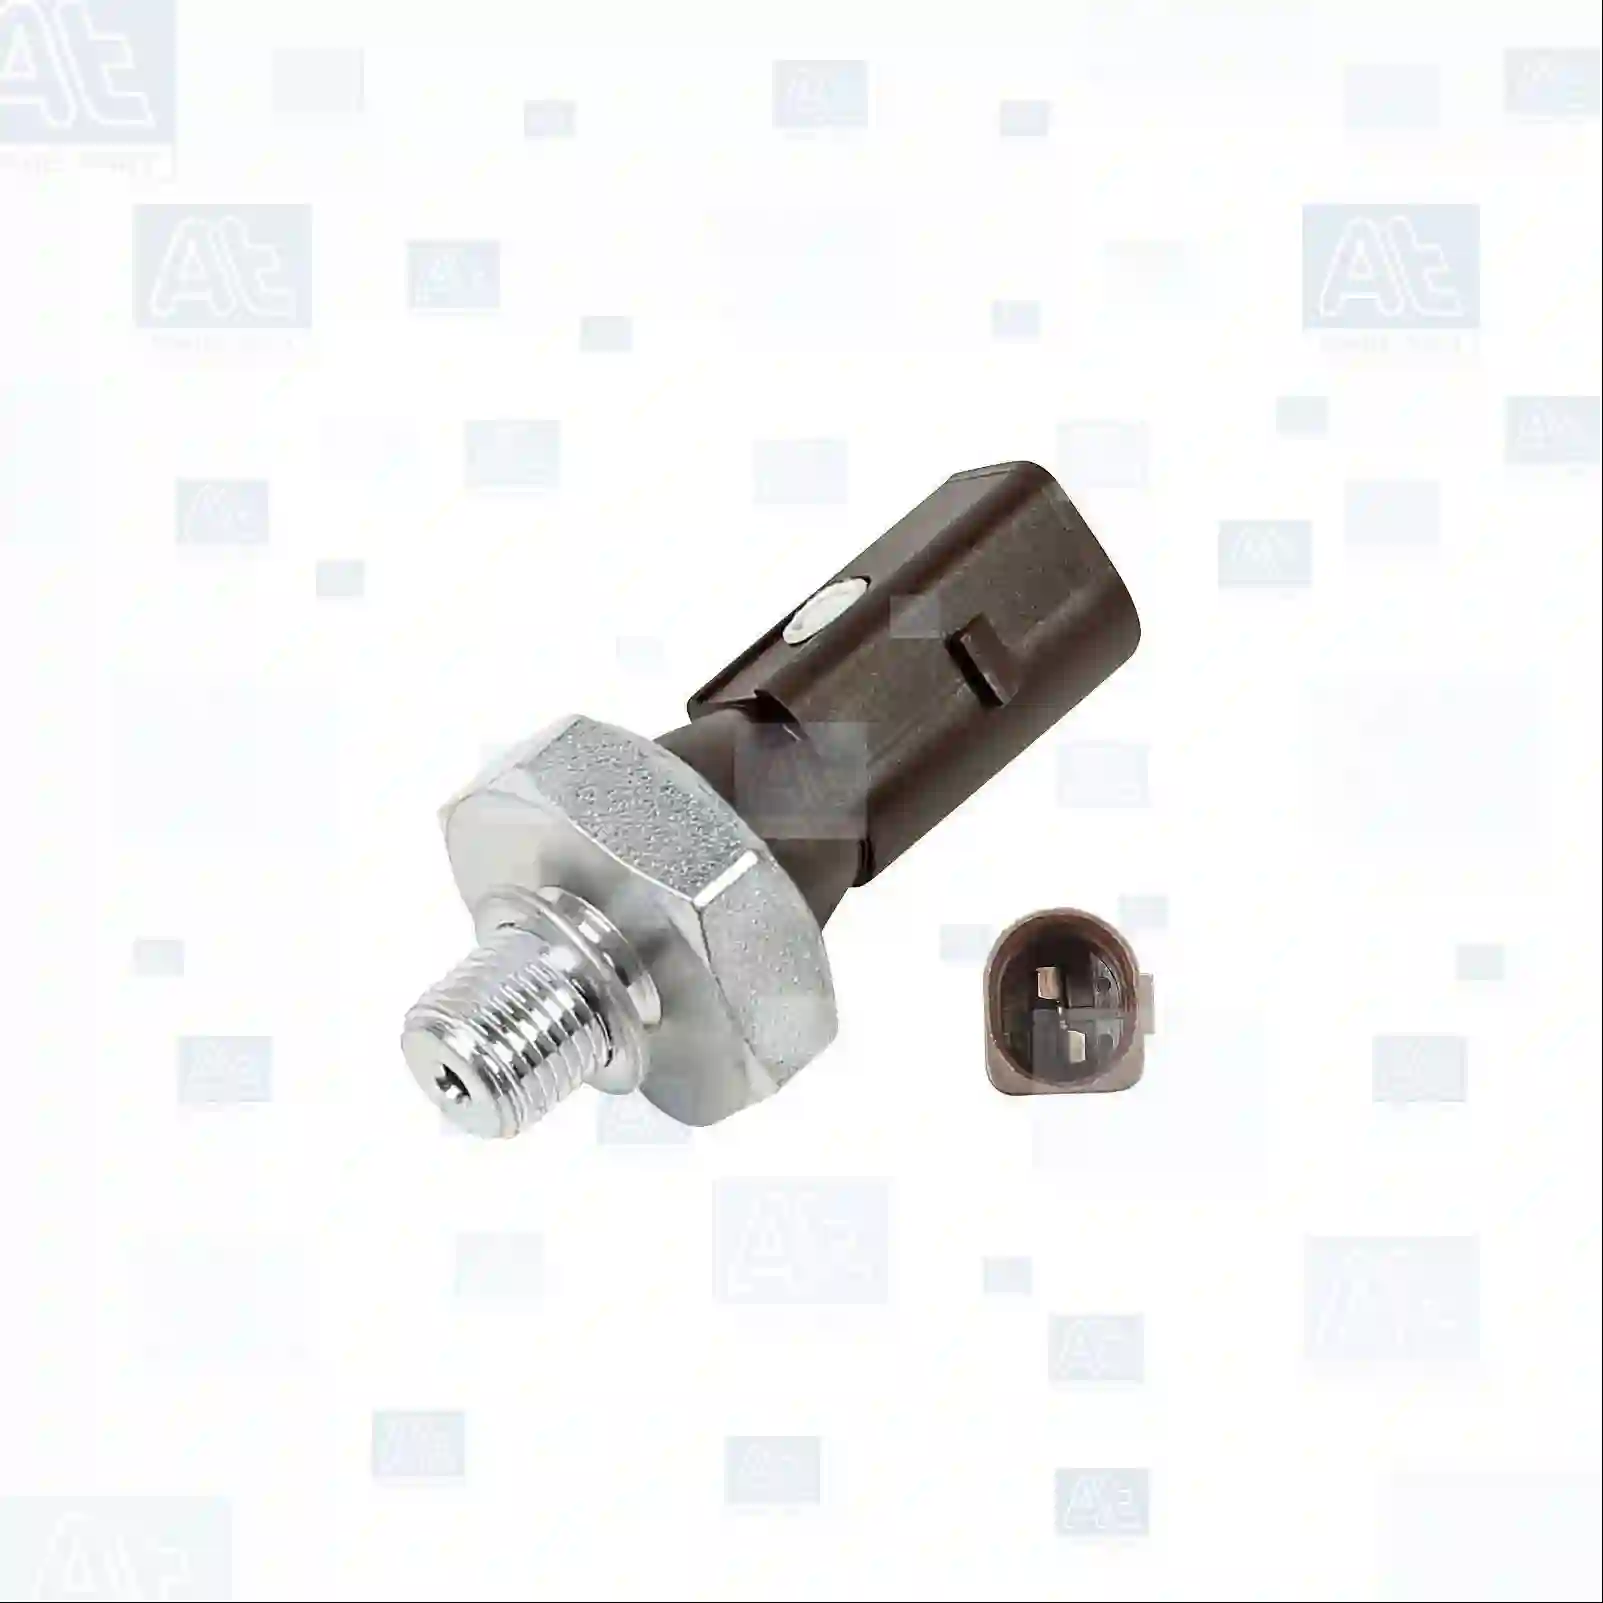 Oil pressure switch, at no 77700321, oem no: 038919081, 038919081C, 038919081D, 038919081H, 038919081K, 68028946AB, 1068028946AB, 68028946AB, K068028946AB, 1108808, 1206977, 1461875, 1M21-9278-AA, 1068028946AB, 68028946AB, K068028946AB, MN980250, MN980277, 94860620300, 94860620301, 038919081, 038919081C, 038919081D, 038919081H, 038919081K, 038919081, 038919081C, 038919081D, 038919081H, 038919081K, 51169, 038919081, 038919081C, 038919081D, 038919081H, 038919081K, ZG20656-0008 At Spare Part | Engine, Accelerator Pedal, Camshaft, Connecting Rod, Crankcase, Crankshaft, Cylinder Head, Engine Suspension Mountings, Exhaust Manifold, Exhaust Gas Recirculation, Filter Kits, Flywheel Housing, General Overhaul Kits, Engine, Intake Manifold, Oil Cleaner, Oil Cooler, Oil Filter, Oil Pump, Oil Sump, Piston & Liner, Sensor & Switch, Timing Case, Turbocharger, Cooling System, Belt Tensioner, Coolant Filter, Coolant Pipe, Corrosion Prevention Agent, Drive, Expansion Tank, Fan, Intercooler, Monitors & Gauges, Radiator, Thermostat, V-Belt / Timing belt, Water Pump, Fuel System, Electronical Injector Unit, Feed Pump, Fuel Filter, cpl., Fuel Gauge Sender,  Fuel Line, Fuel Pump, Fuel Tank, Injection Line Kit, Injection Pump, Exhaust System, Clutch & Pedal, Gearbox, Propeller Shaft, Axles, Brake System, Hubs & Wheels, Suspension, Leaf Spring, Universal Parts / Accessories, Steering, Electrical System, Cabin Oil pressure switch, at no 77700321, oem no: 038919081, 038919081C, 038919081D, 038919081H, 038919081K, 68028946AB, 1068028946AB, 68028946AB, K068028946AB, 1108808, 1206977, 1461875, 1M21-9278-AA, 1068028946AB, 68028946AB, K068028946AB, MN980250, MN980277, 94860620300, 94860620301, 038919081, 038919081C, 038919081D, 038919081H, 038919081K, 038919081, 038919081C, 038919081D, 038919081H, 038919081K, 51169, 038919081, 038919081C, 038919081D, 038919081H, 038919081K, ZG20656-0008 At Spare Part | Engine, Accelerator Pedal, Camshaft, Connecting Rod, Crankcase, Crankshaft, Cylinder Head, Engine Suspension Mountings, Exhaust Manifold, Exhaust Gas Recirculation, Filter Kits, Flywheel Housing, General Overhaul Kits, Engine, Intake Manifold, Oil Cleaner, Oil Cooler, Oil Filter, Oil Pump, Oil Sump, Piston & Liner, Sensor & Switch, Timing Case, Turbocharger, Cooling System, Belt Tensioner, Coolant Filter, Coolant Pipe, Corrosion Prevention Agent, Drive, Expansion Tank, Fan, Intercooler, Monitors & Gauges, Radiator, Thermostat, V-Belt / Timing belt, Water Pump, Fuel System, Electronical Injector Unit, Feed Pump, Fuel Filter, cpl., Fuel Gauge Sender,  Fuel Line, Fuel Pump, Fuel Tank, Injection Line Kit, Injection Pump, Exhaust System, Clutch & Pedal, Gearbox, Propeller Shaft, Axles, Brake System, Hubs & Wheels, Suspension, Leaf Spring, Universal Parts / Accessories, Steering, Electrical System, Cabin